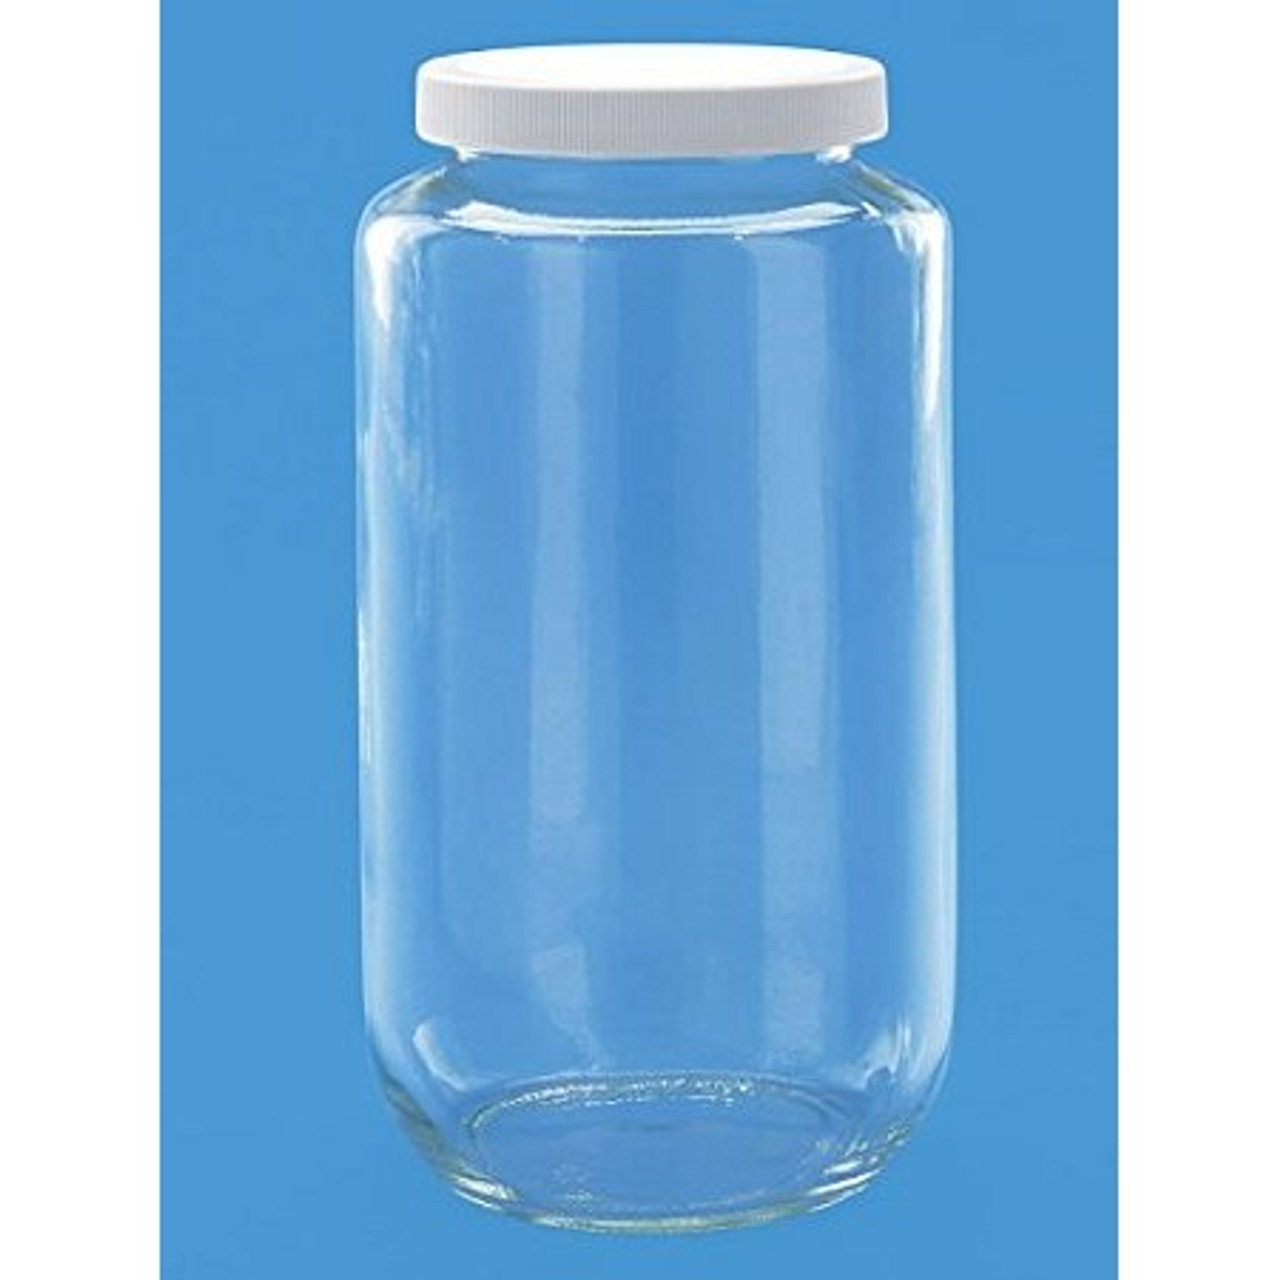 Wide-Mouth Glass Jars - 1 Gallon, 4 Opening, Plastic Cap S-19317P